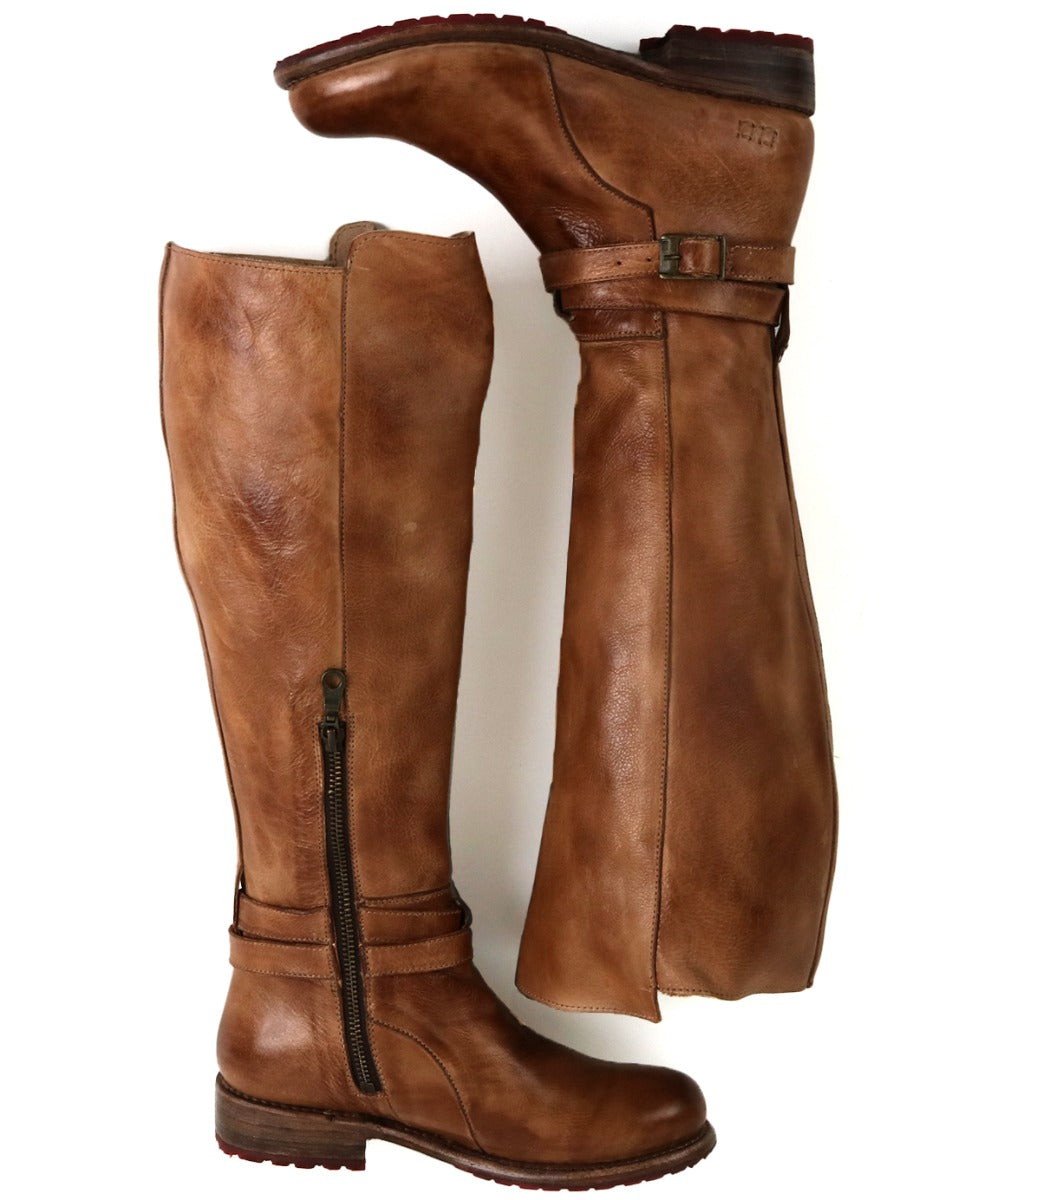 A pair of Bed Stu Bristol Wide Calf boots with zippers on the side.